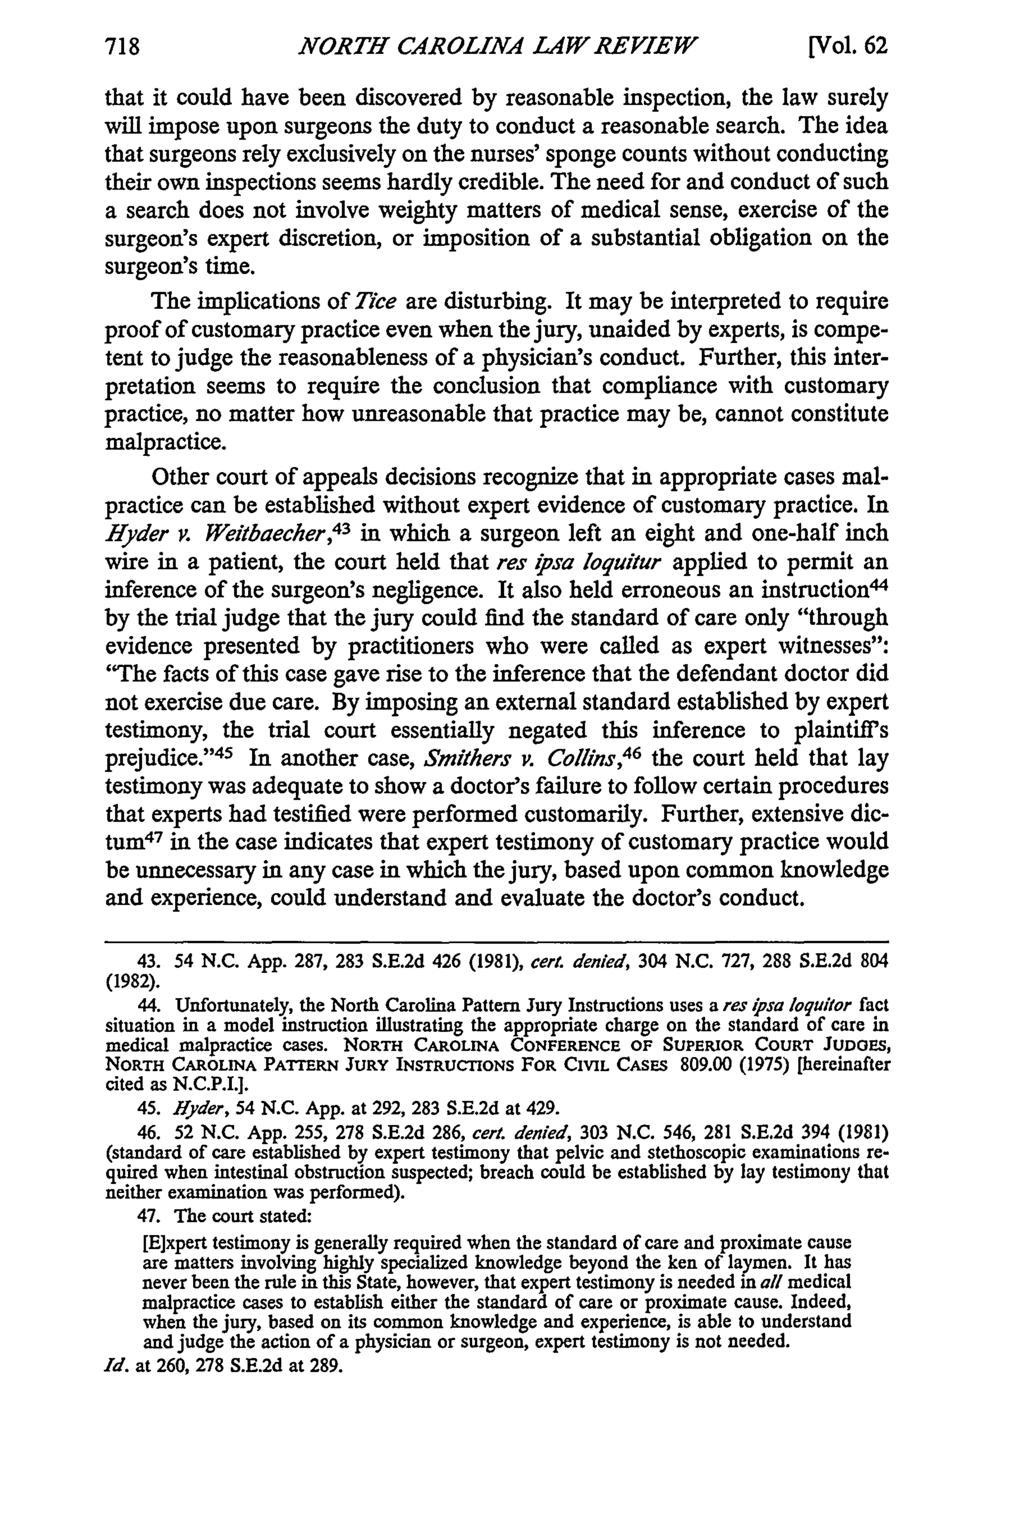 NORTH CAROLINA LAW REVIEW [Vol. 62 that it could have been discovered by reasonable inspection, the law surely will impose upon surgeons the duty to conduct a reasonable search.